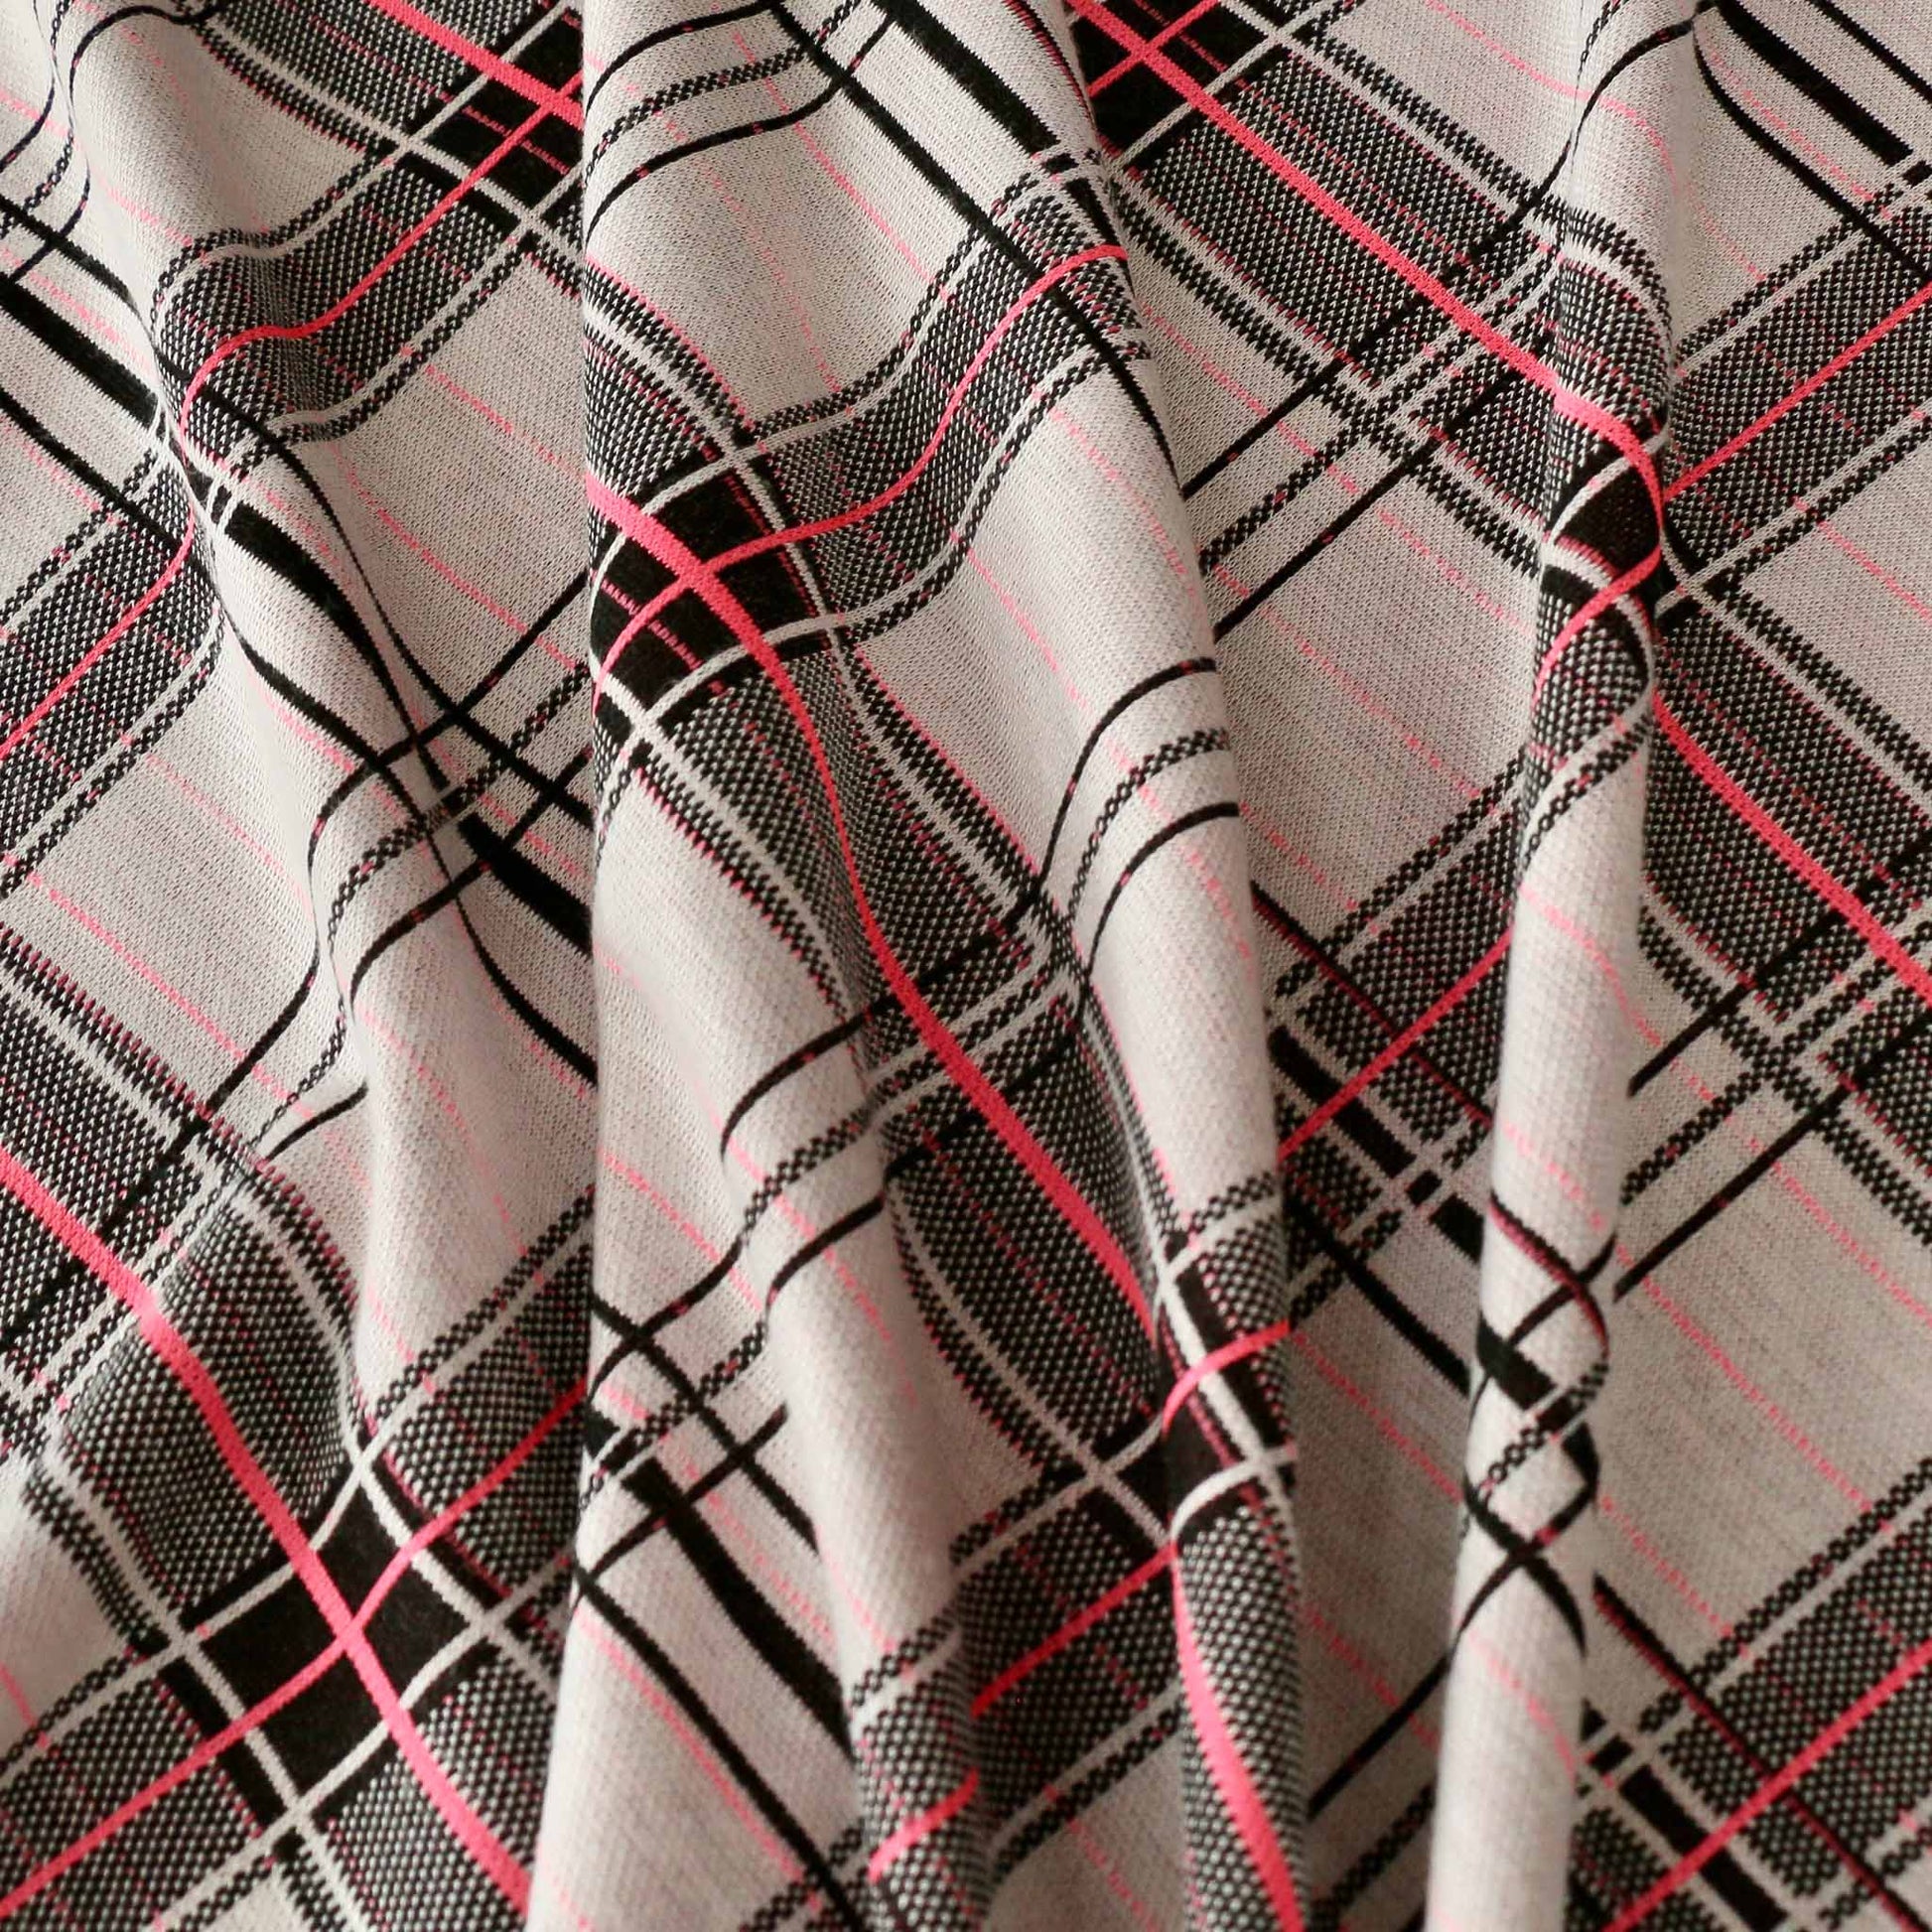 white and pink ponte roma jersey knit dressmaking fabric with check pattern